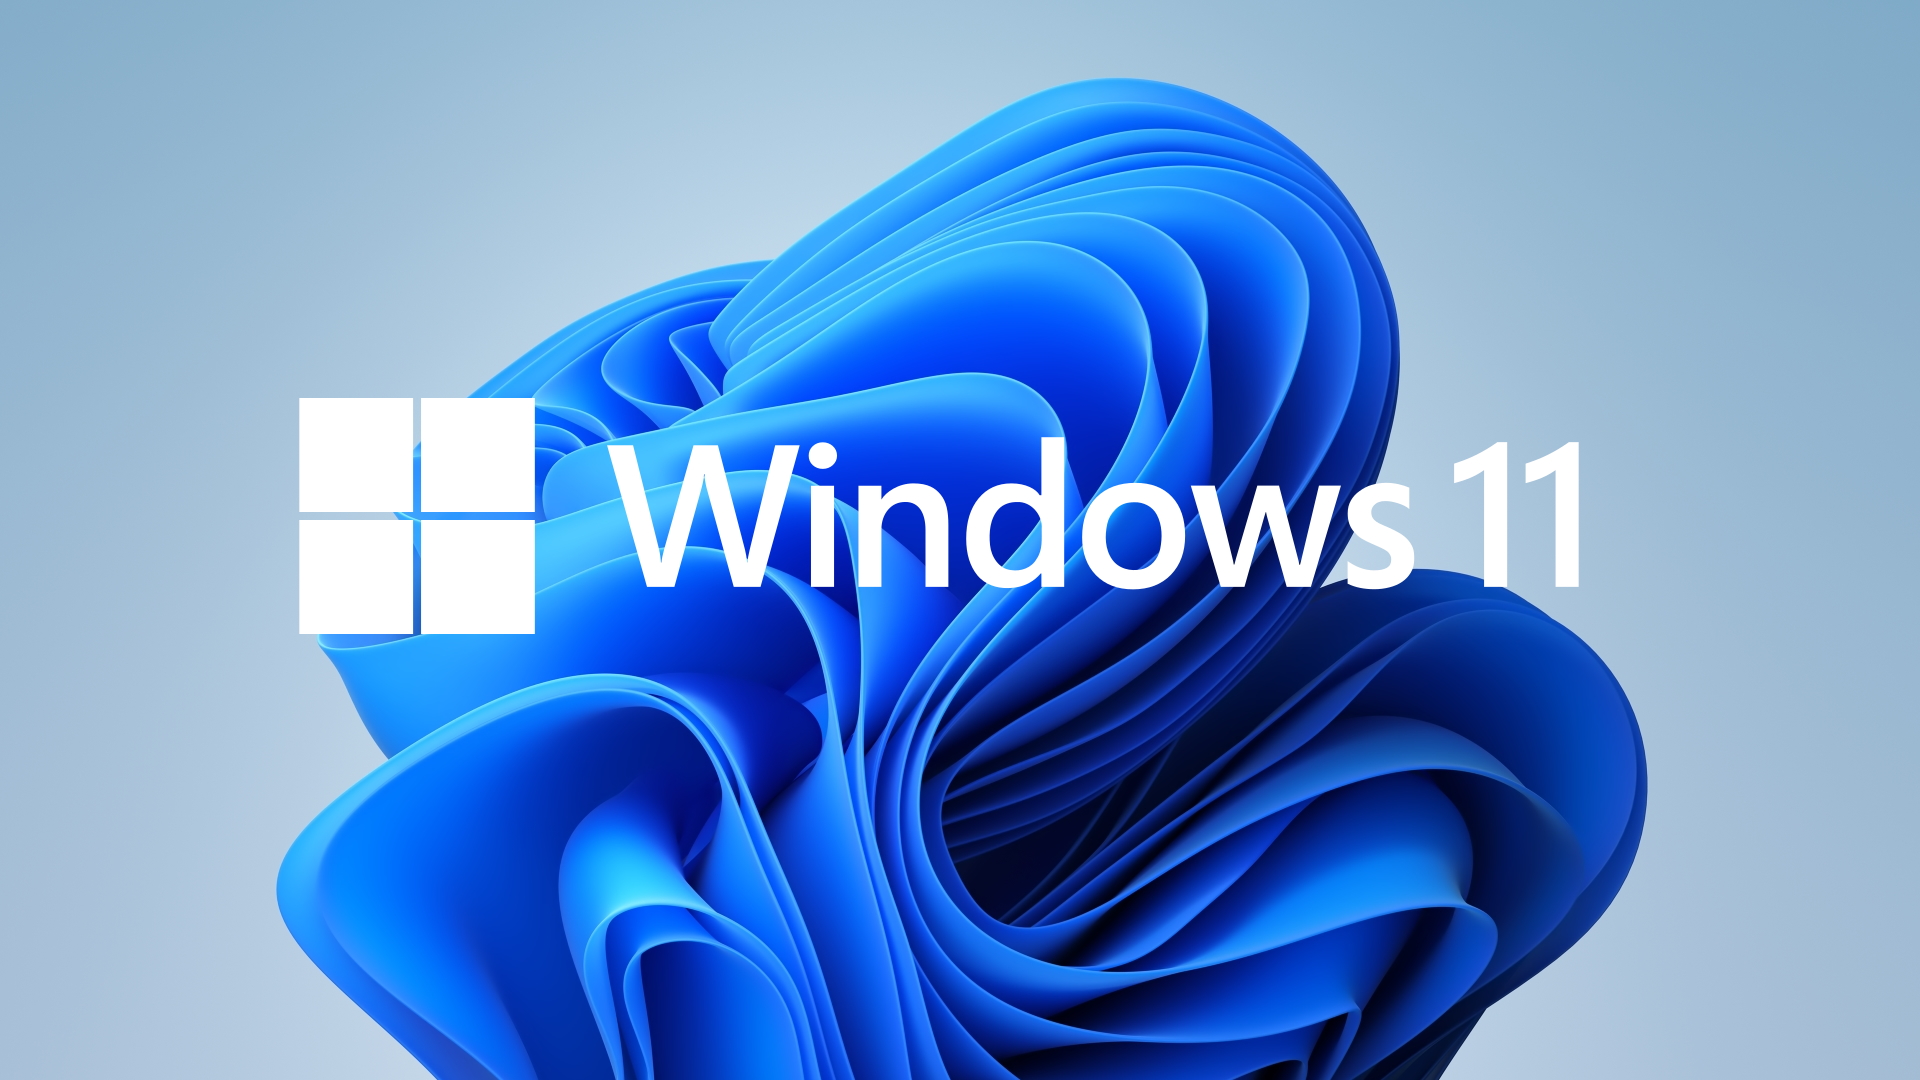 Windows 11 Insider Preview Build 22000.120 arrives for the Dev and Beta ...